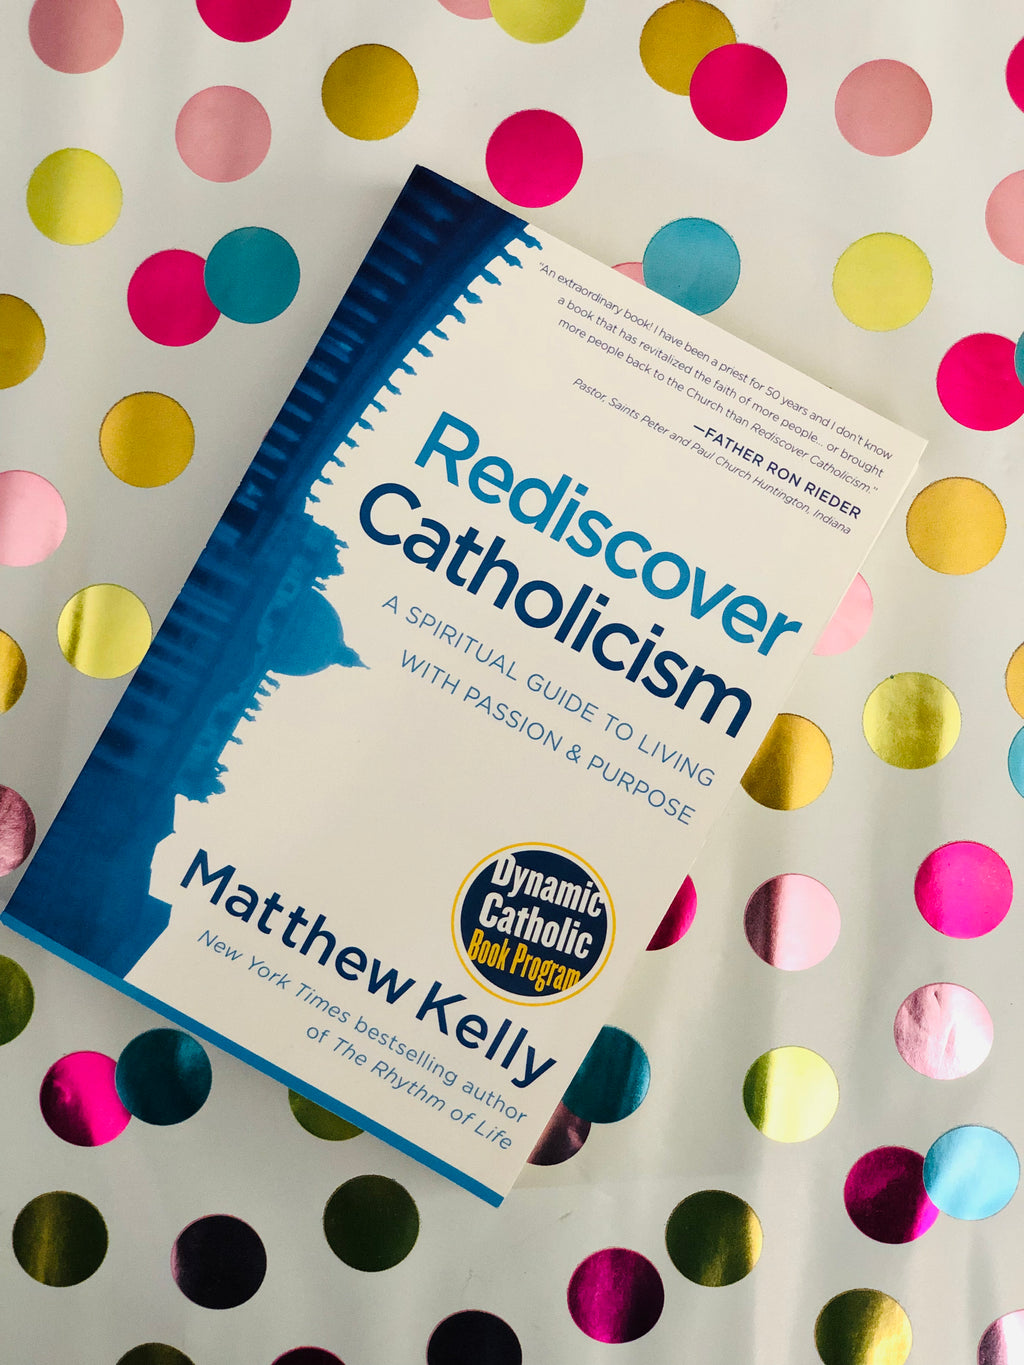 Rediscover Catholicism- By Mathew Kelly